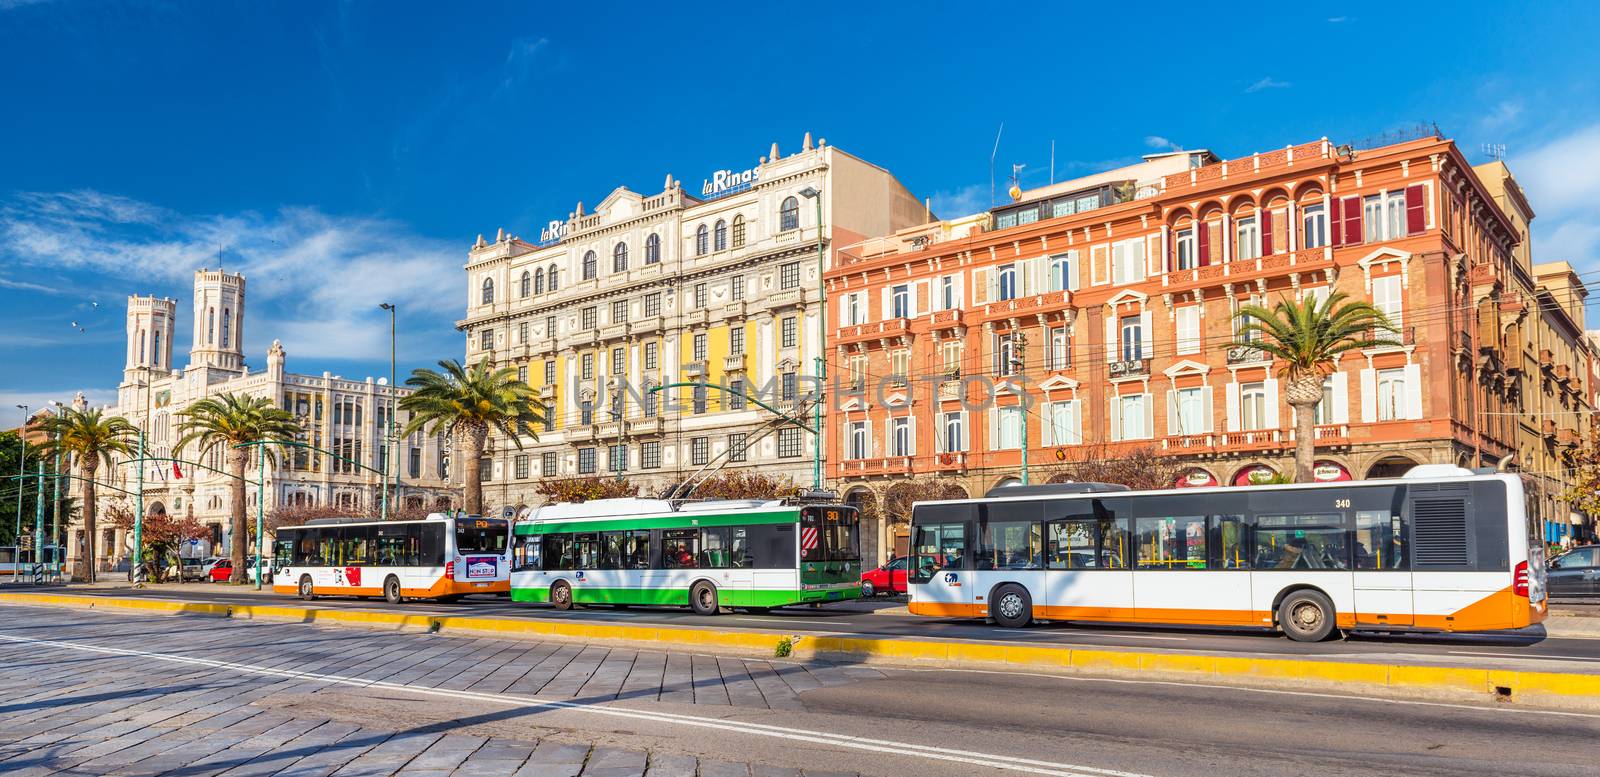 Cagliari, Sardinia - January 2016, Italy: Beautiful colorful buildings on Cagliari seafront, buses and trolley car parked near bus stop on the central street of the city by travellaggio